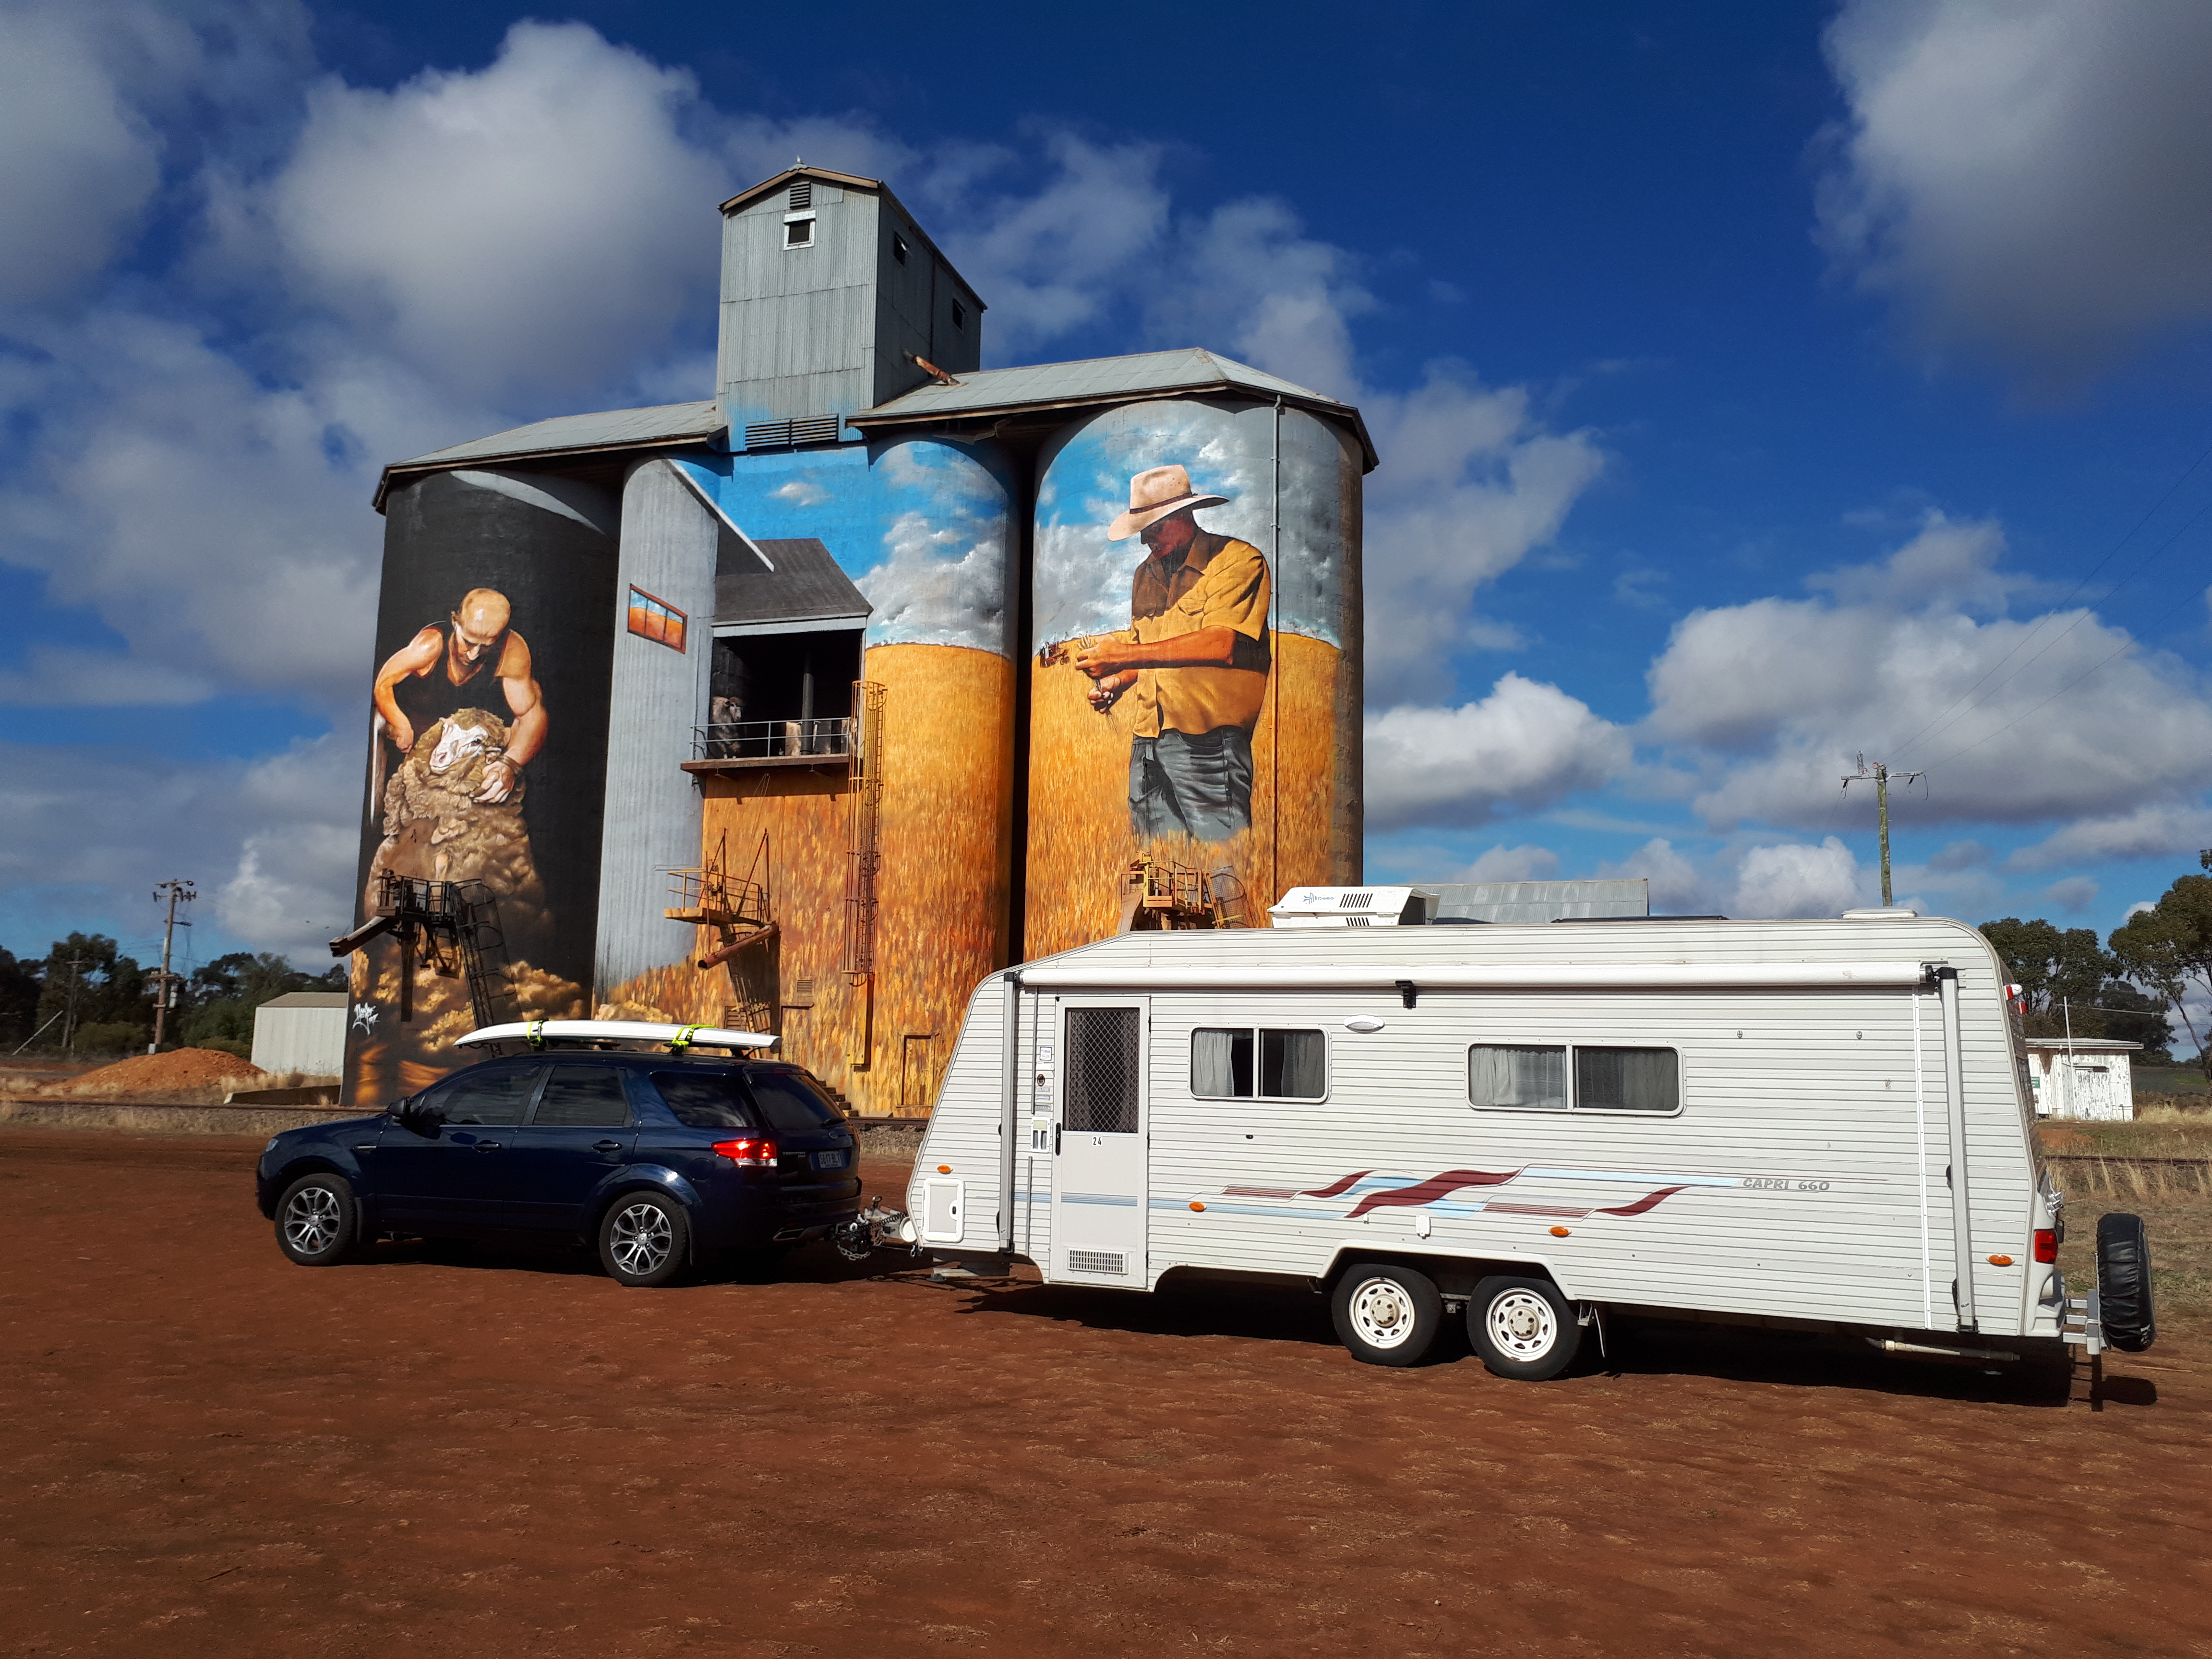 My caravan aptly named "24", my car and I on the road out of South Australia